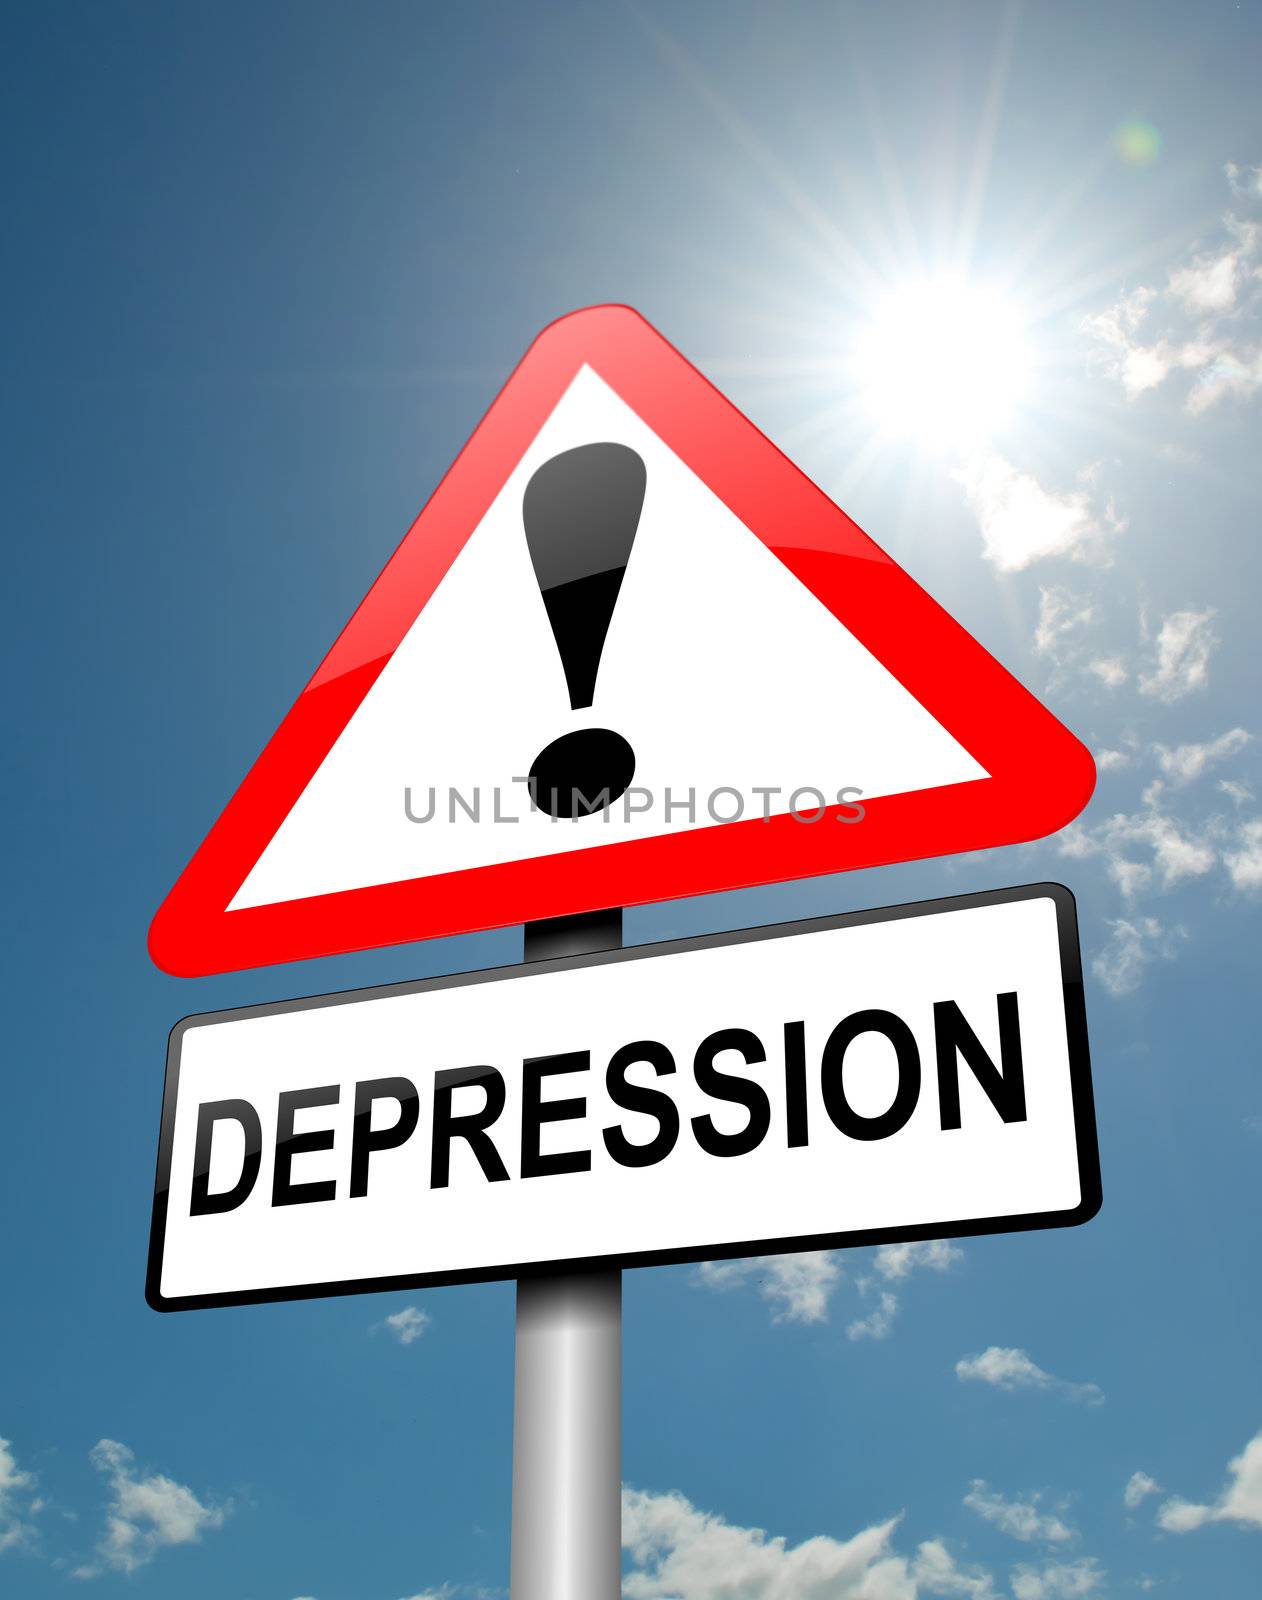 Illustration depicting a red and white triangular warning sign with a depression concept. Blue sky background.